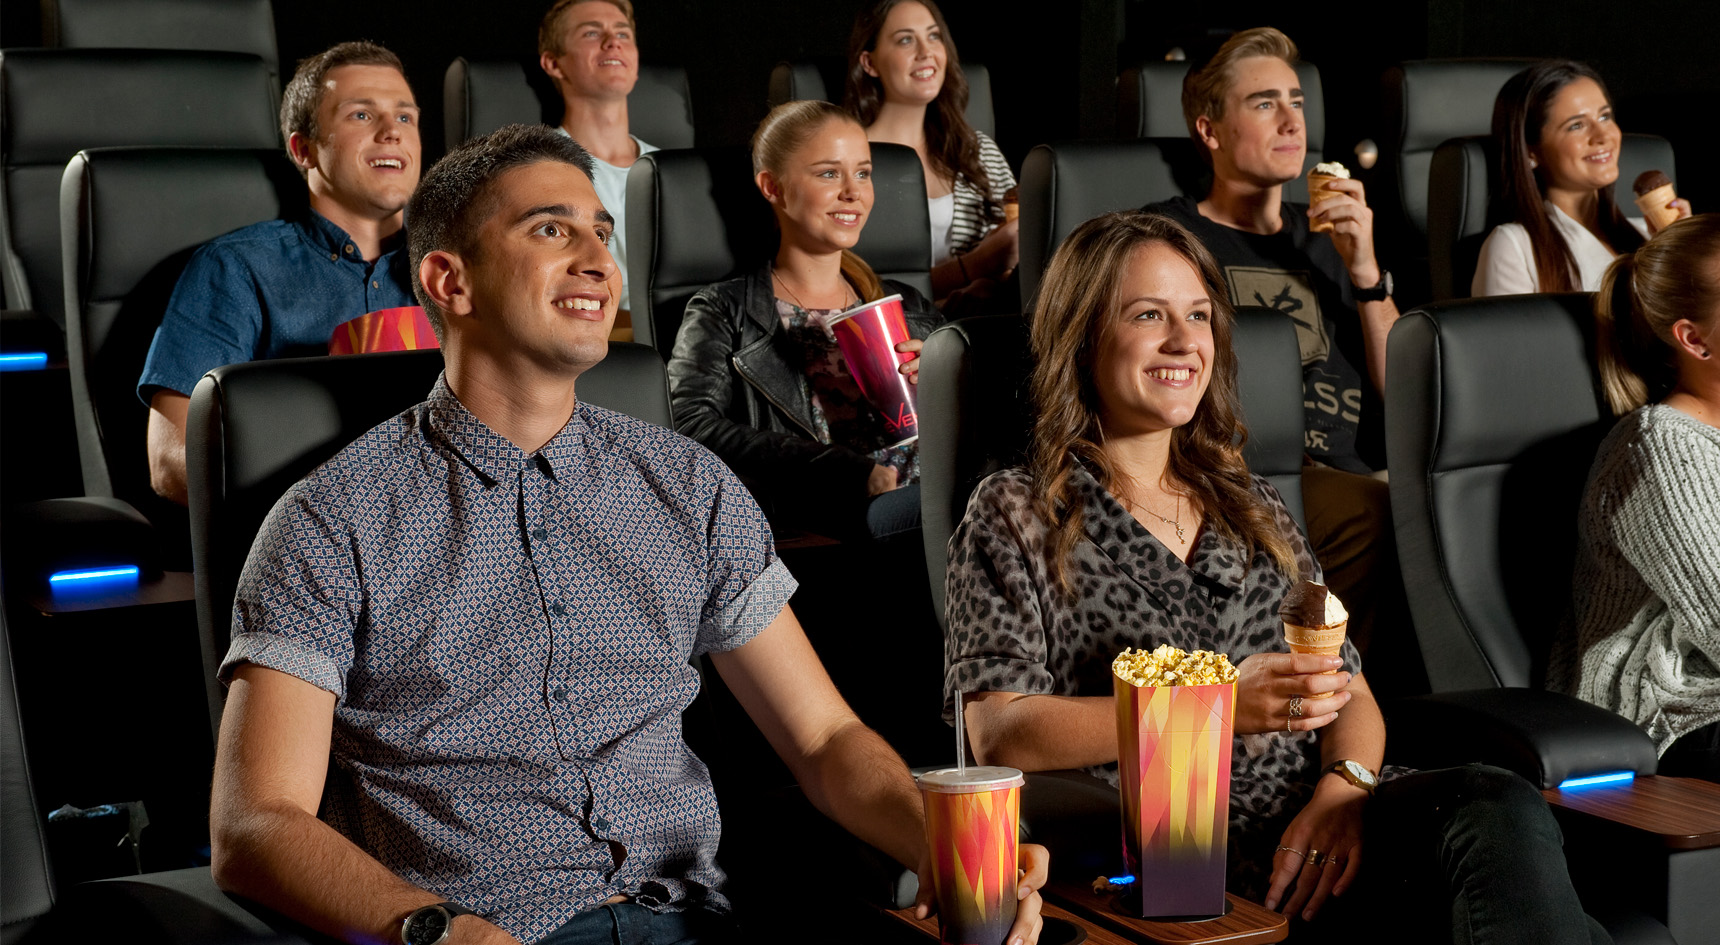 People enjoying Gold Class at the cinema. Image: Getty